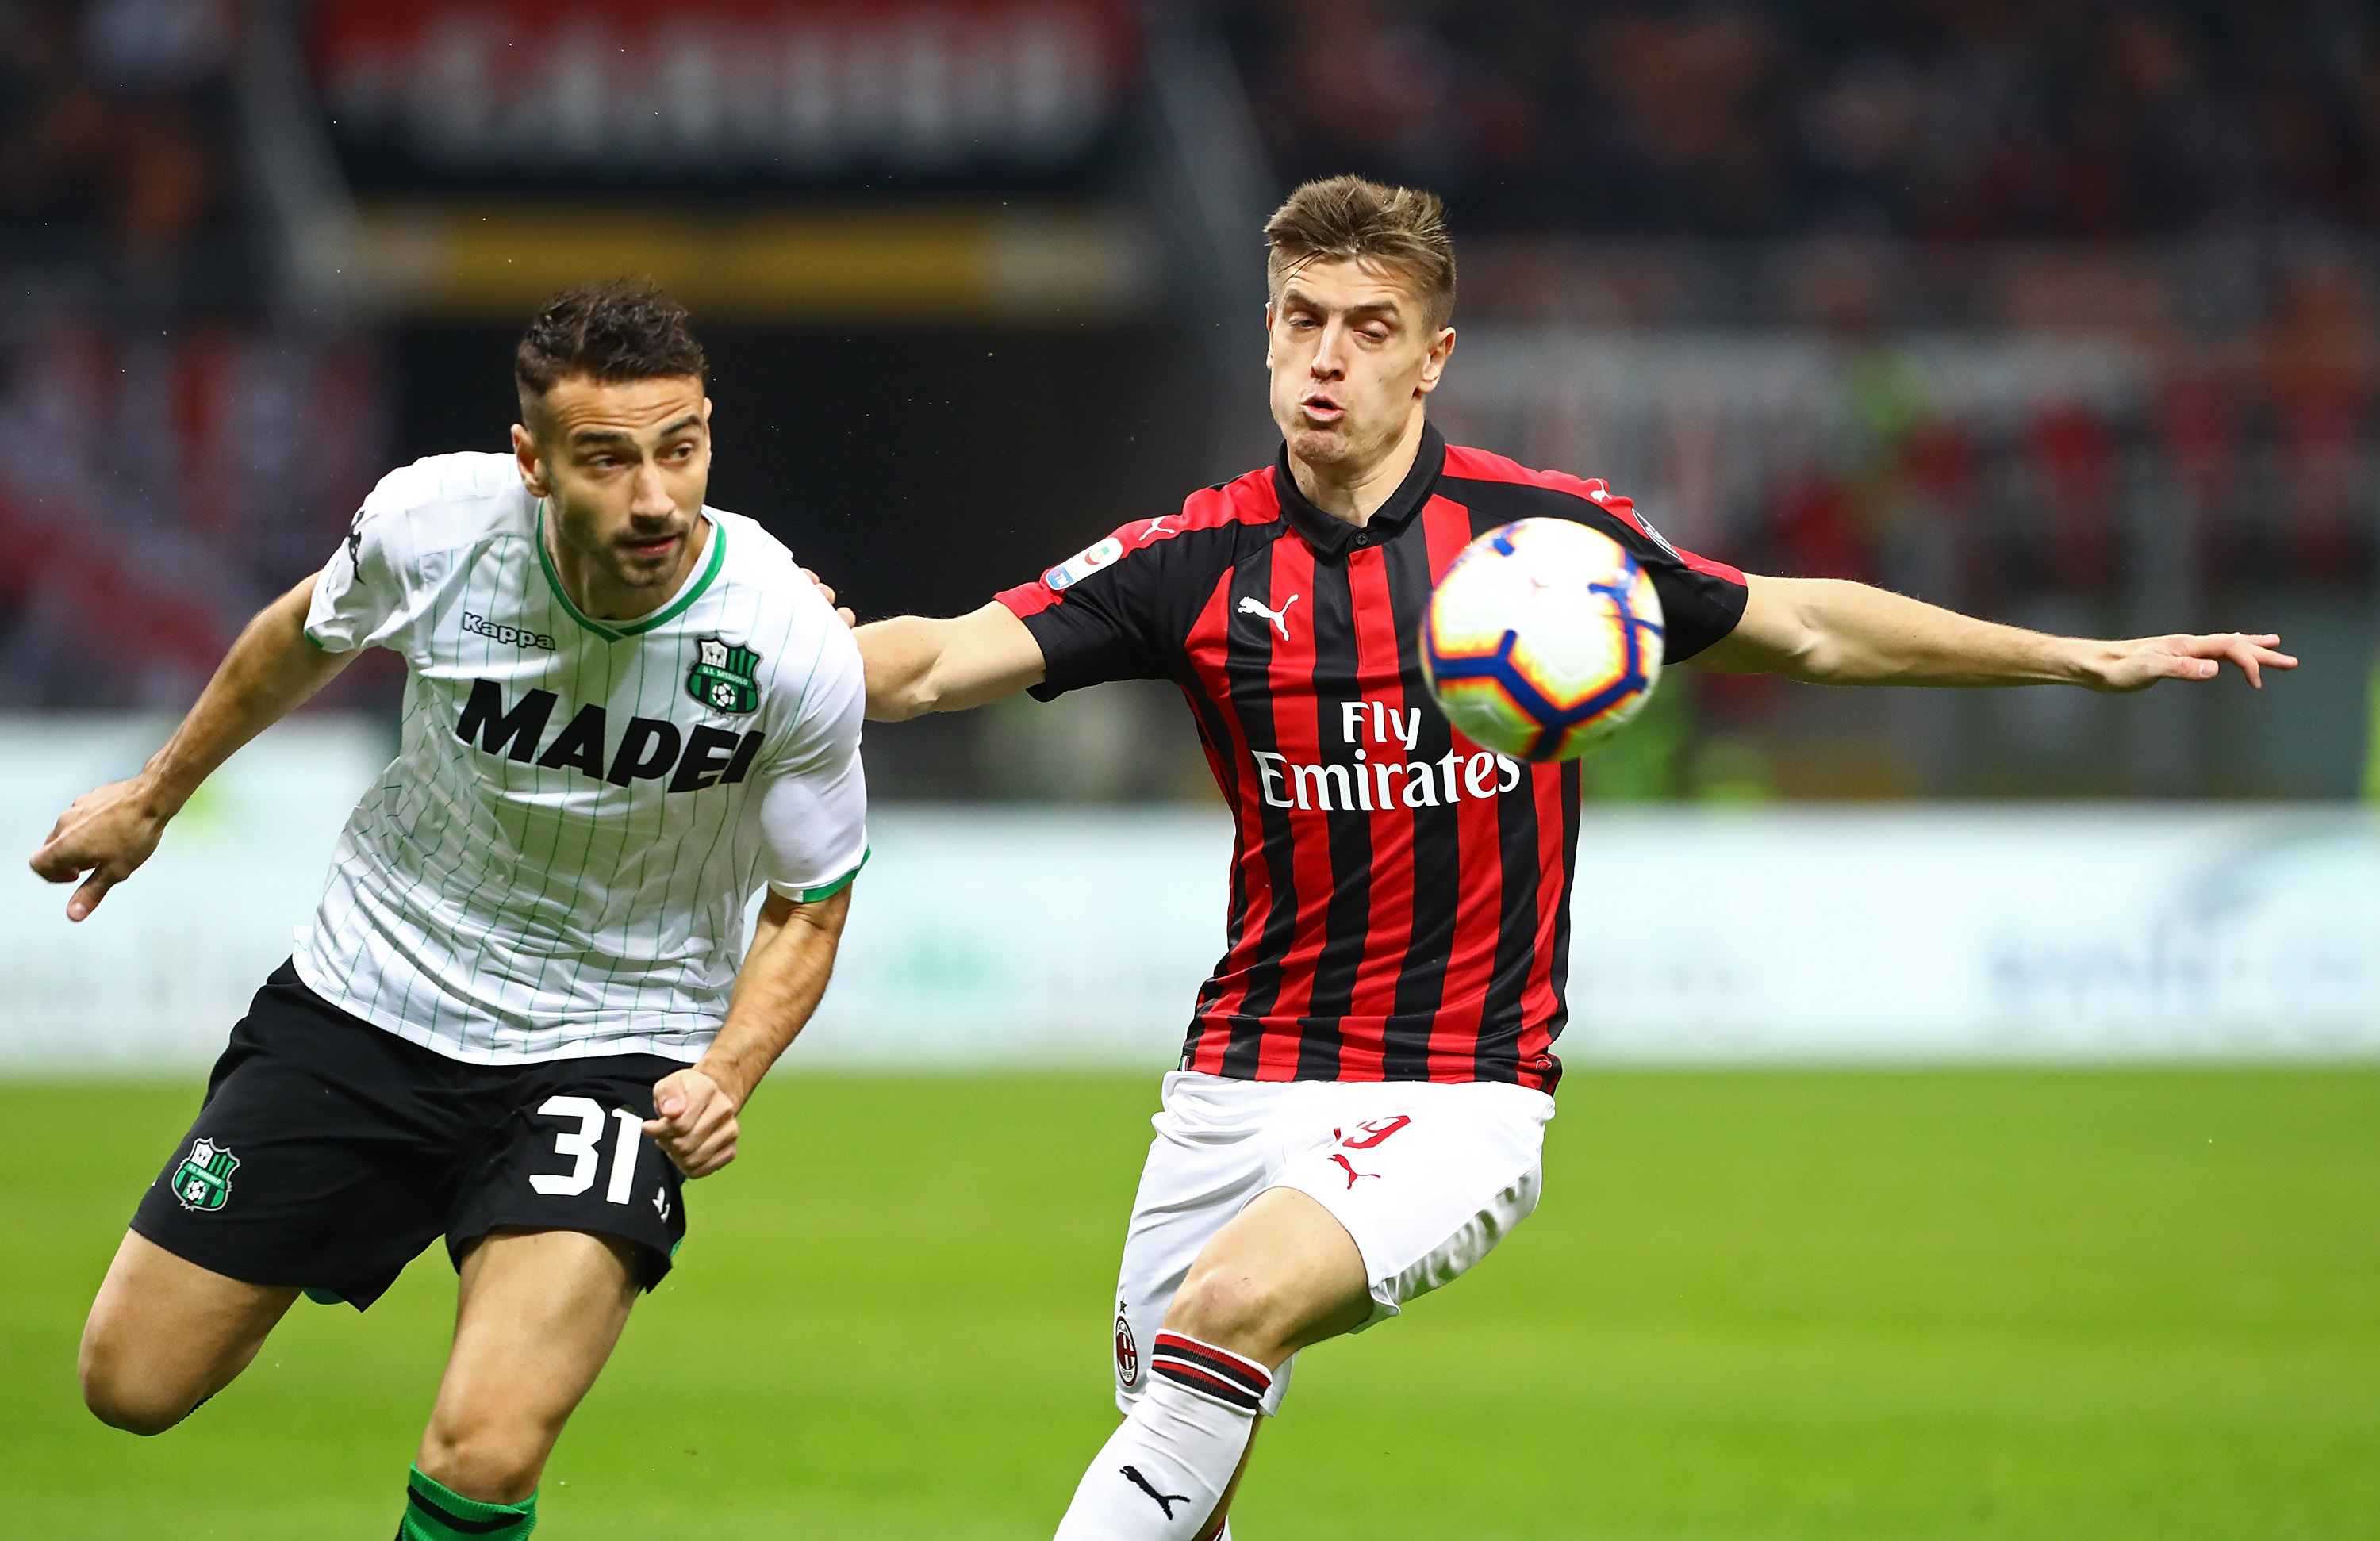 MILAN, ITALY - MARCH 02: Krzysztof Piatek (R) of AC Milan competes for the ball with Gian Marco Ferrari (L) of US Sassuolo during the Serie A match between AC Milan and US Sassuolo at Stadio Giuseppe Meazza on March 2, 2019 in Milan, Italy. (Photo by Marco Luzzani/Getty Images)